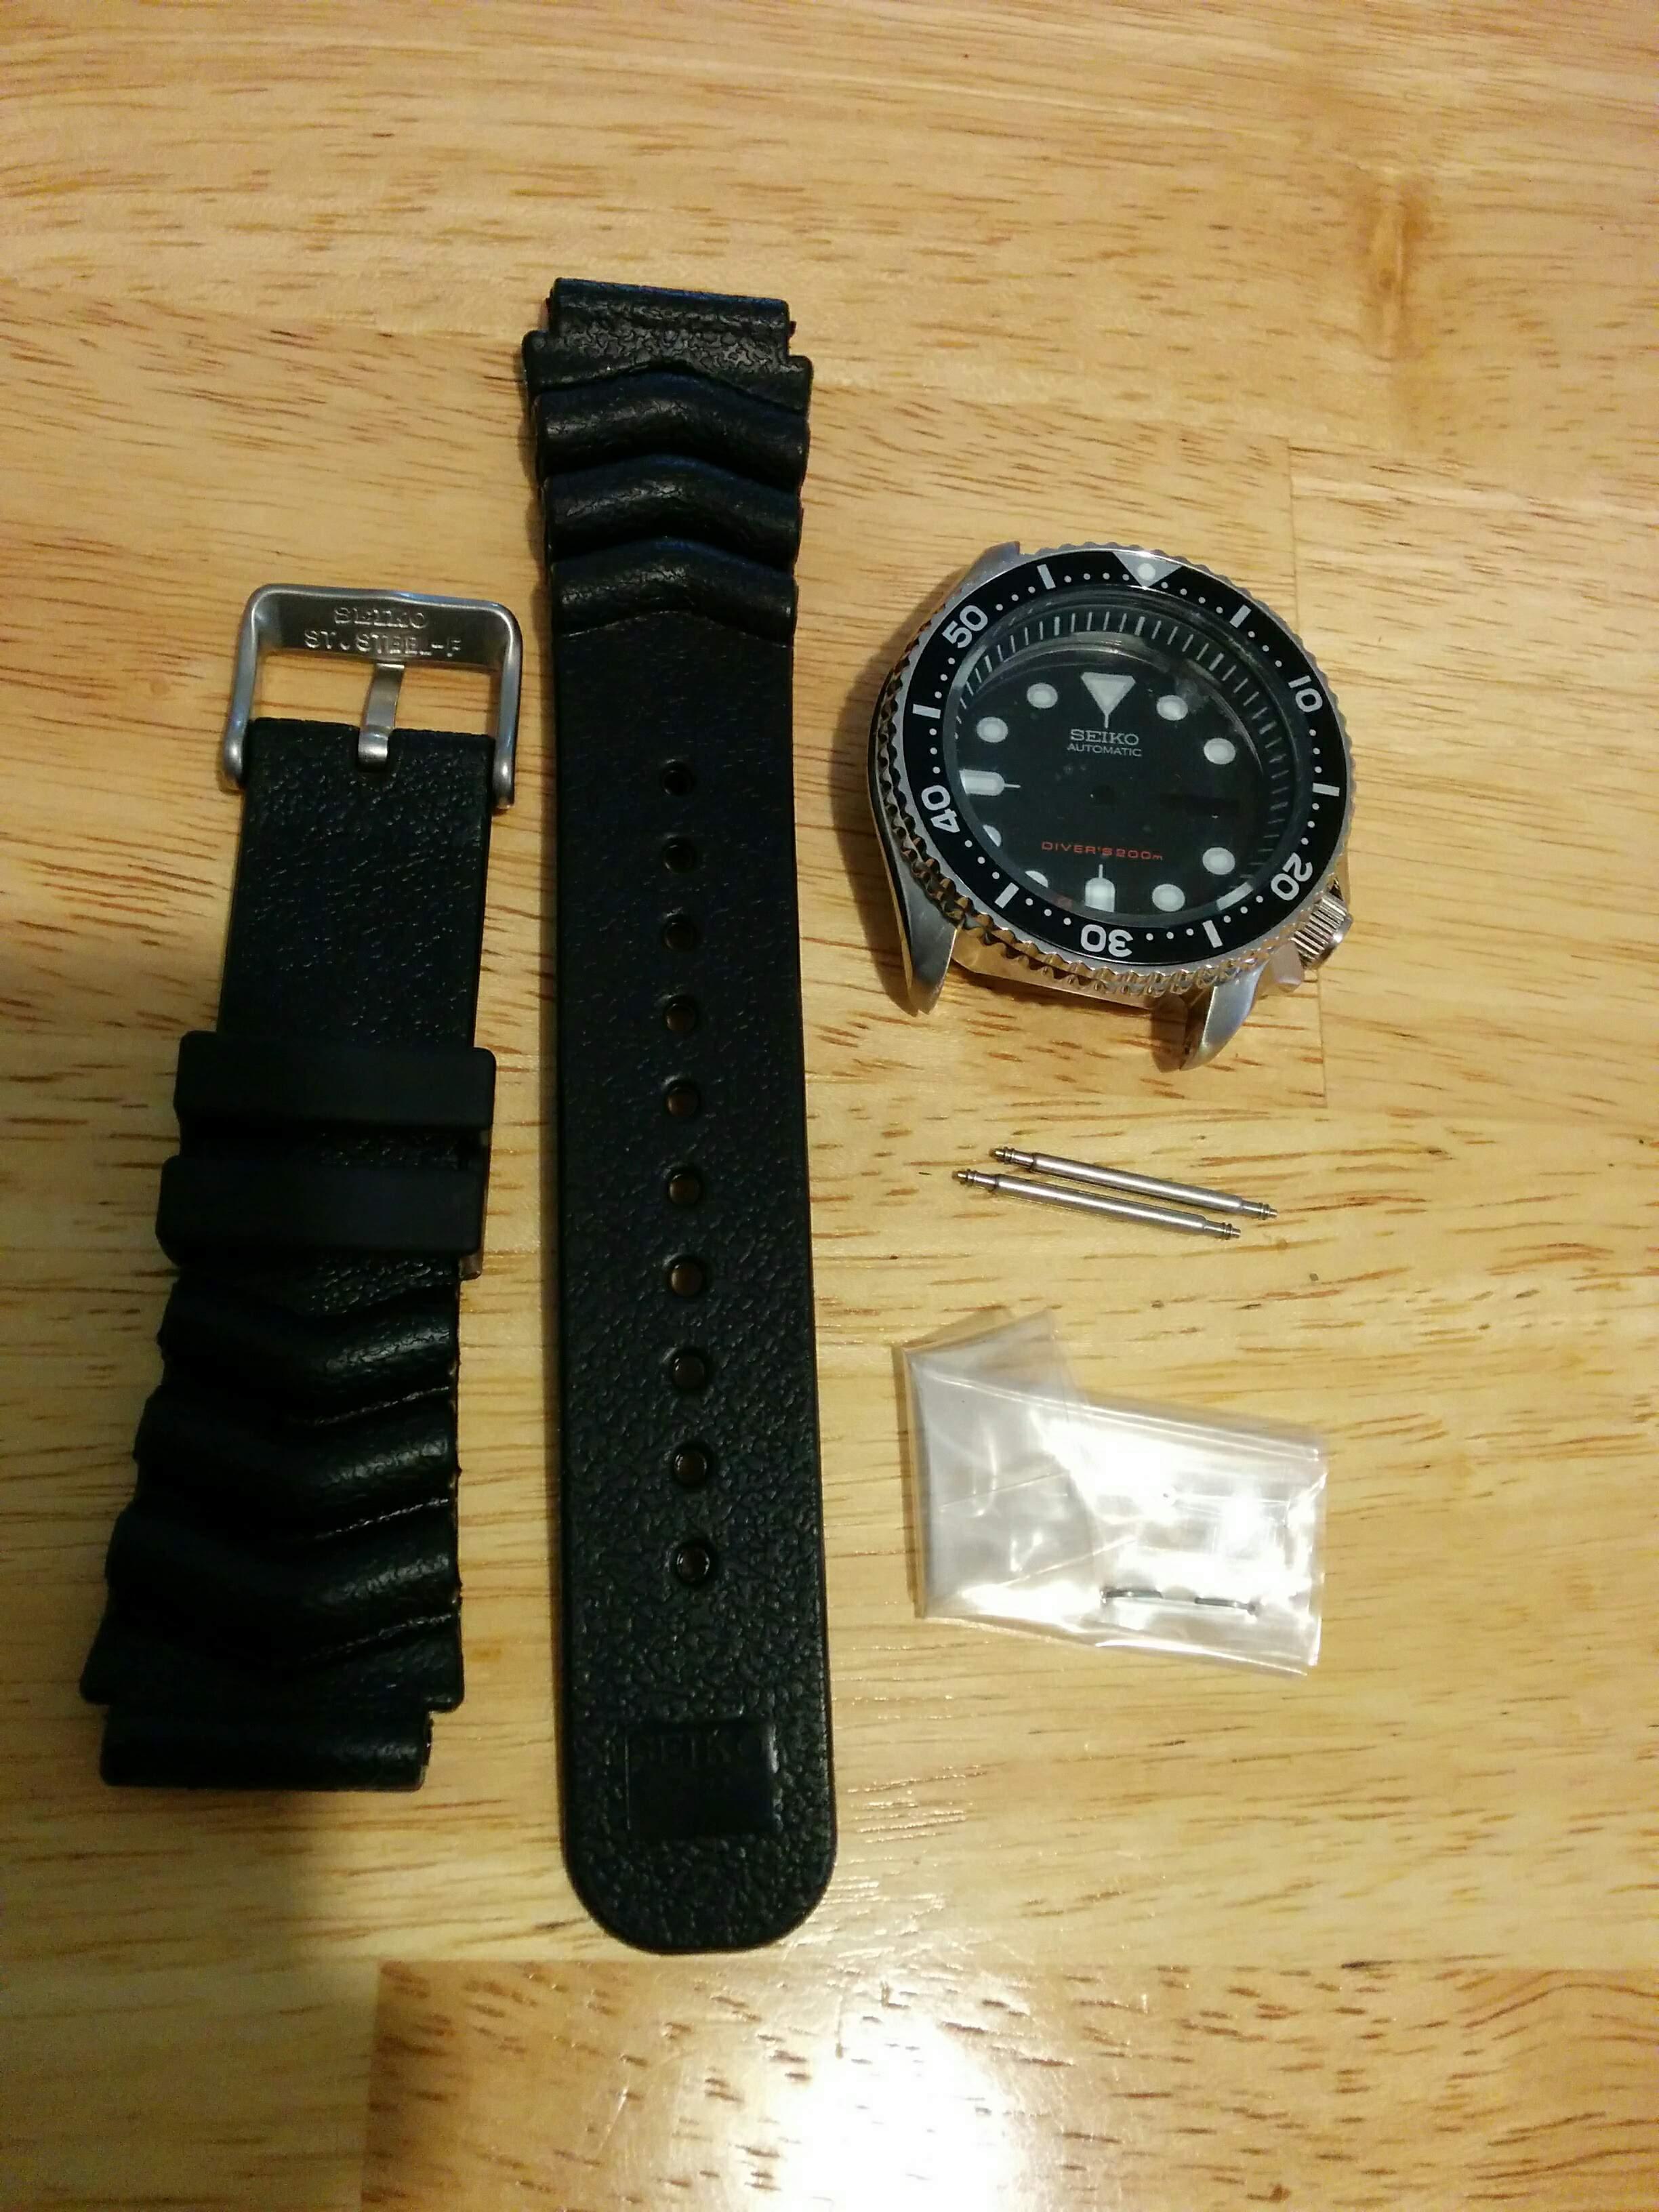 SKX007 build - Chat About Watches & The Industry Here - Watch Repair Talk